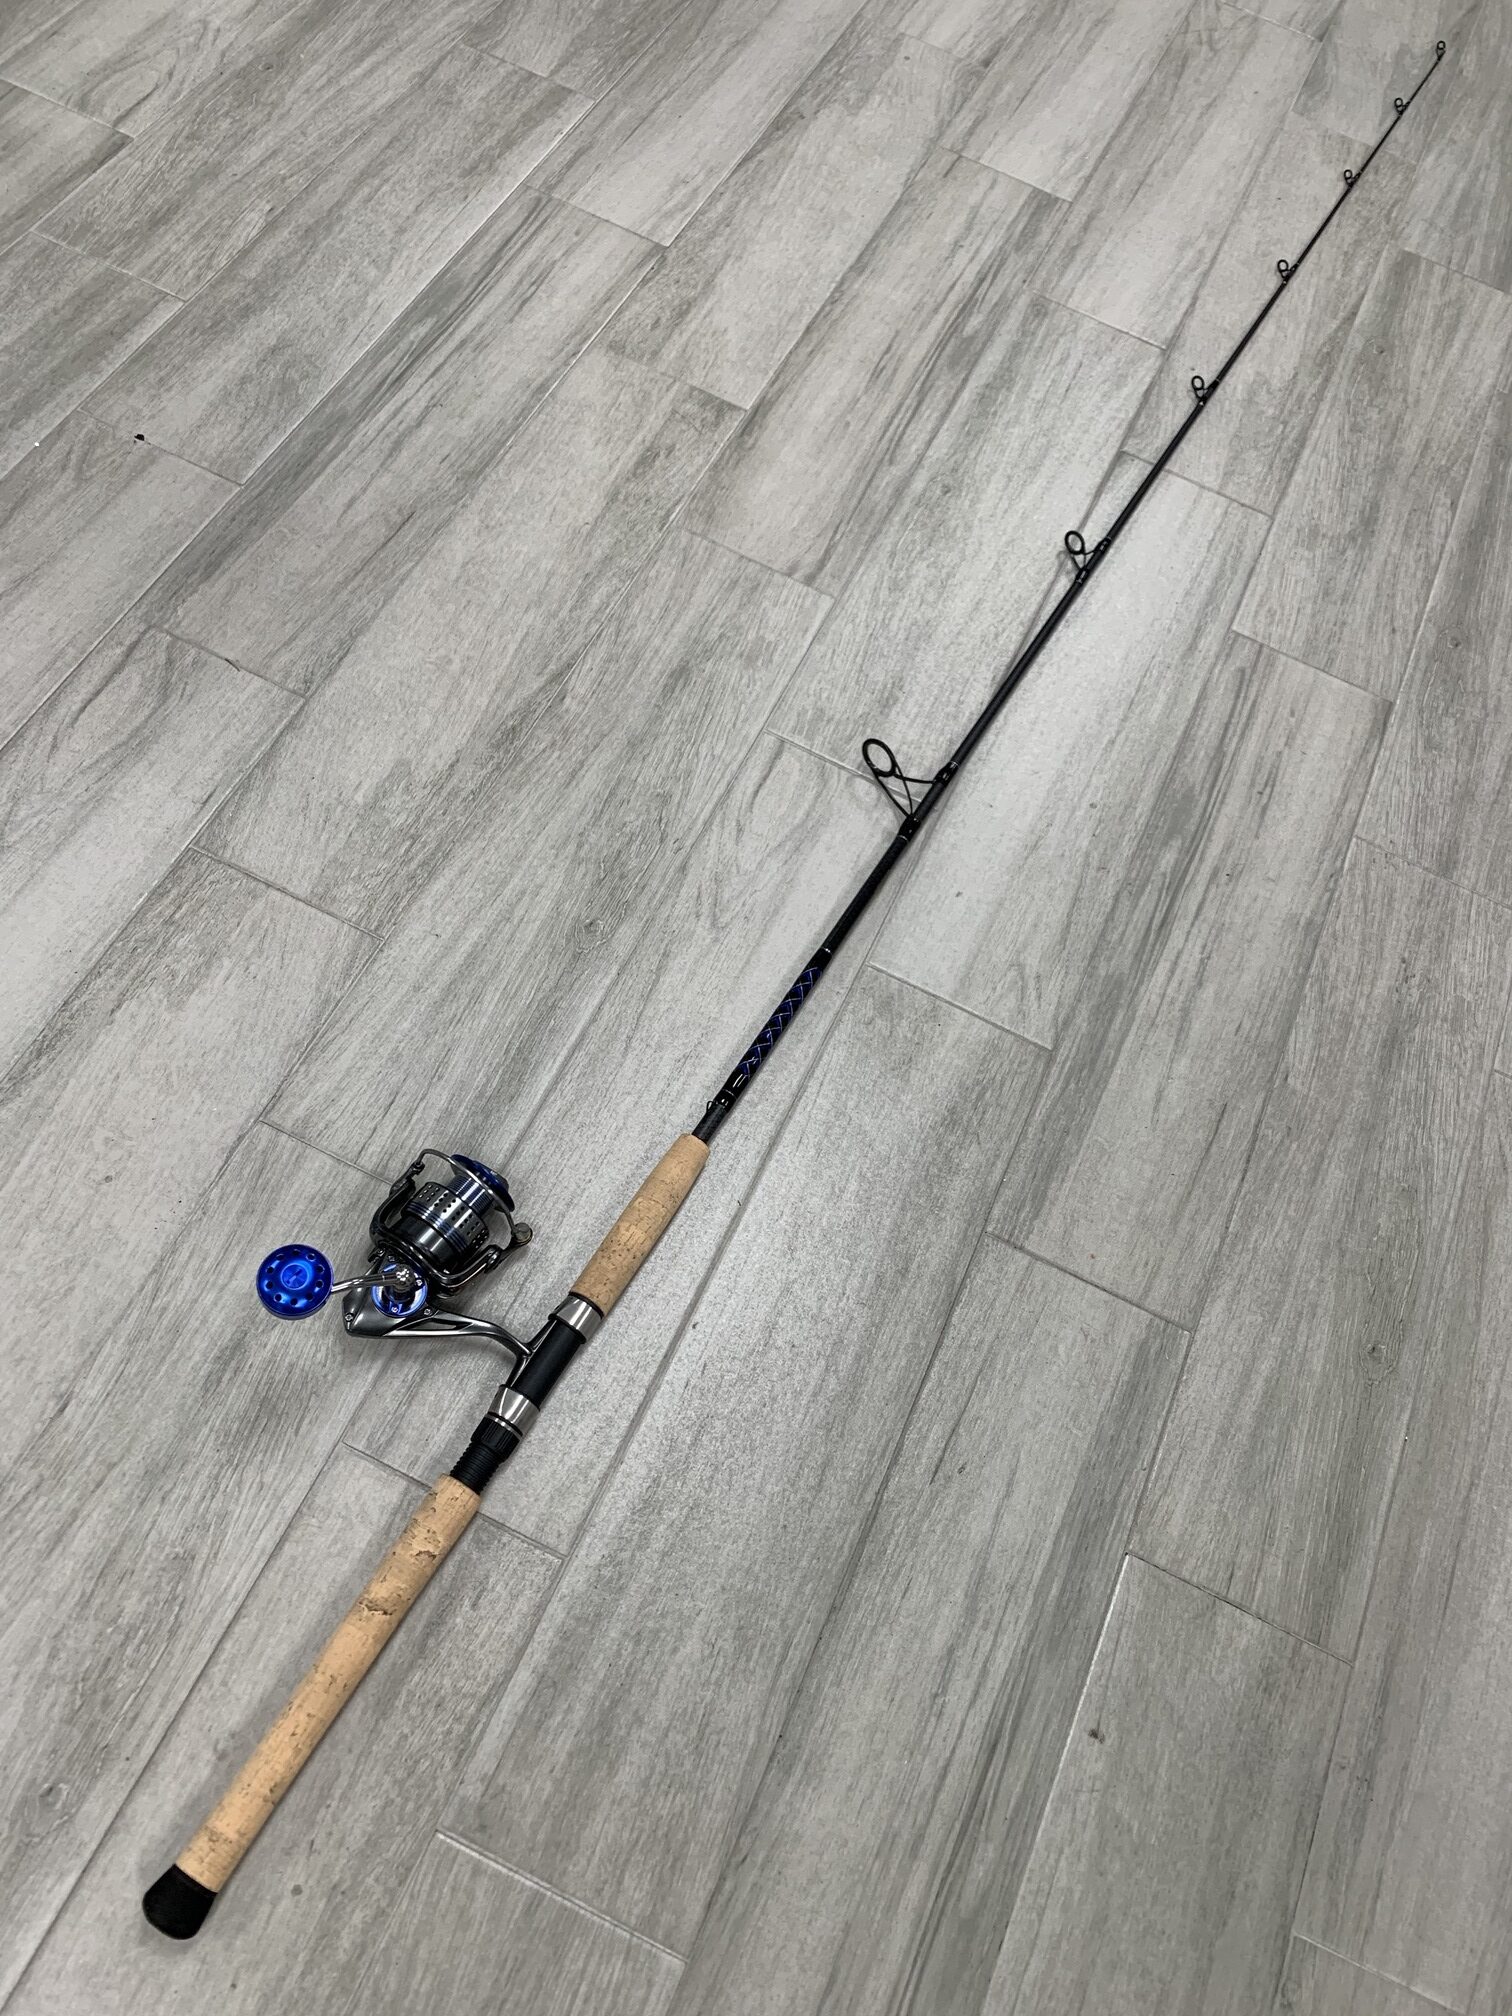 7′ 8-17# Inshore Carbon Fiber Spinning Rod with Canyon 3500 Spinning Reel  Blue-Silver – Connley Fishing